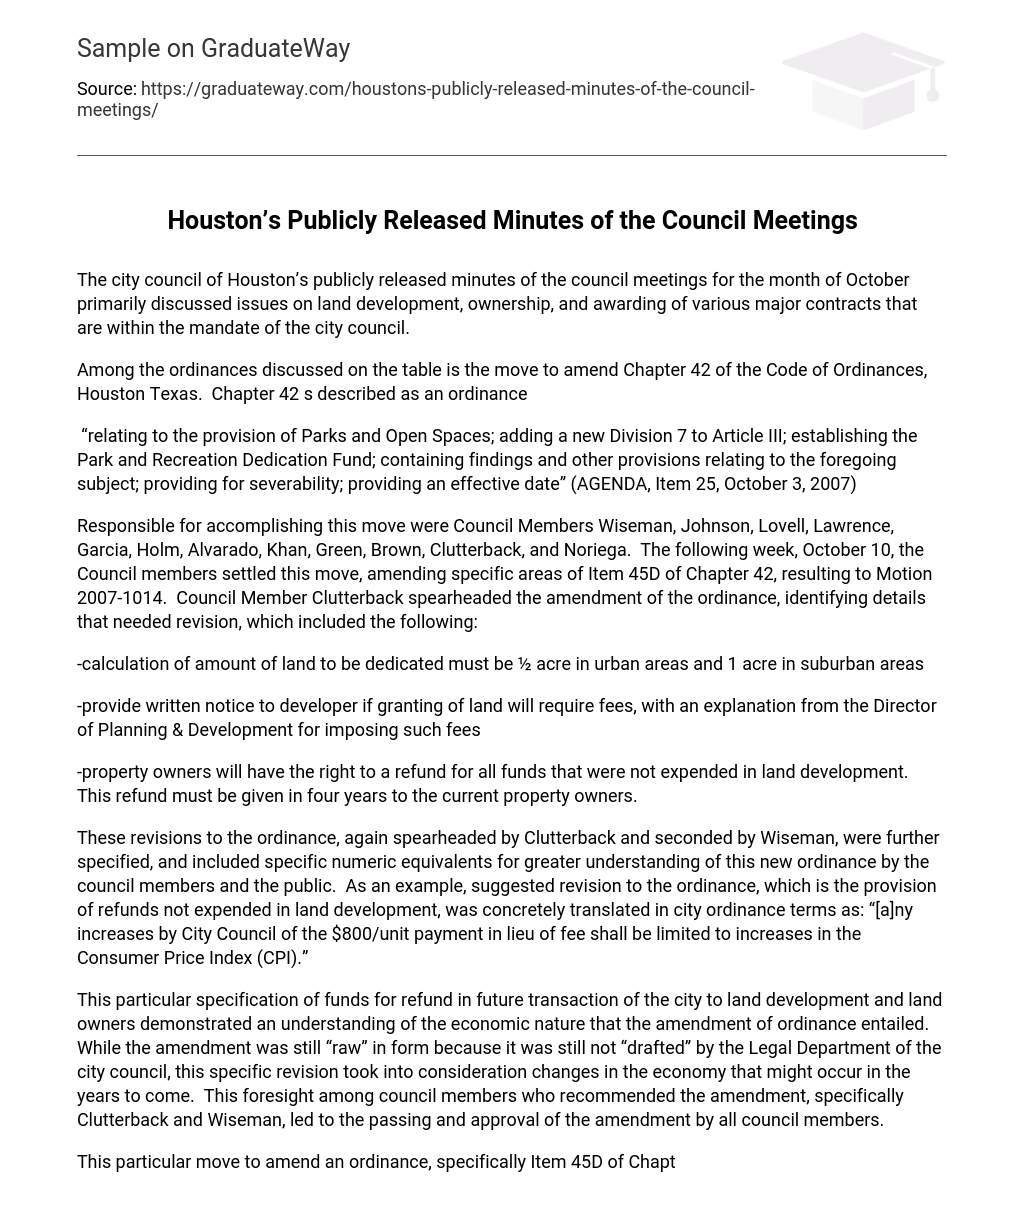 Houston’s Publicly Released Minutes of the Council Meetings